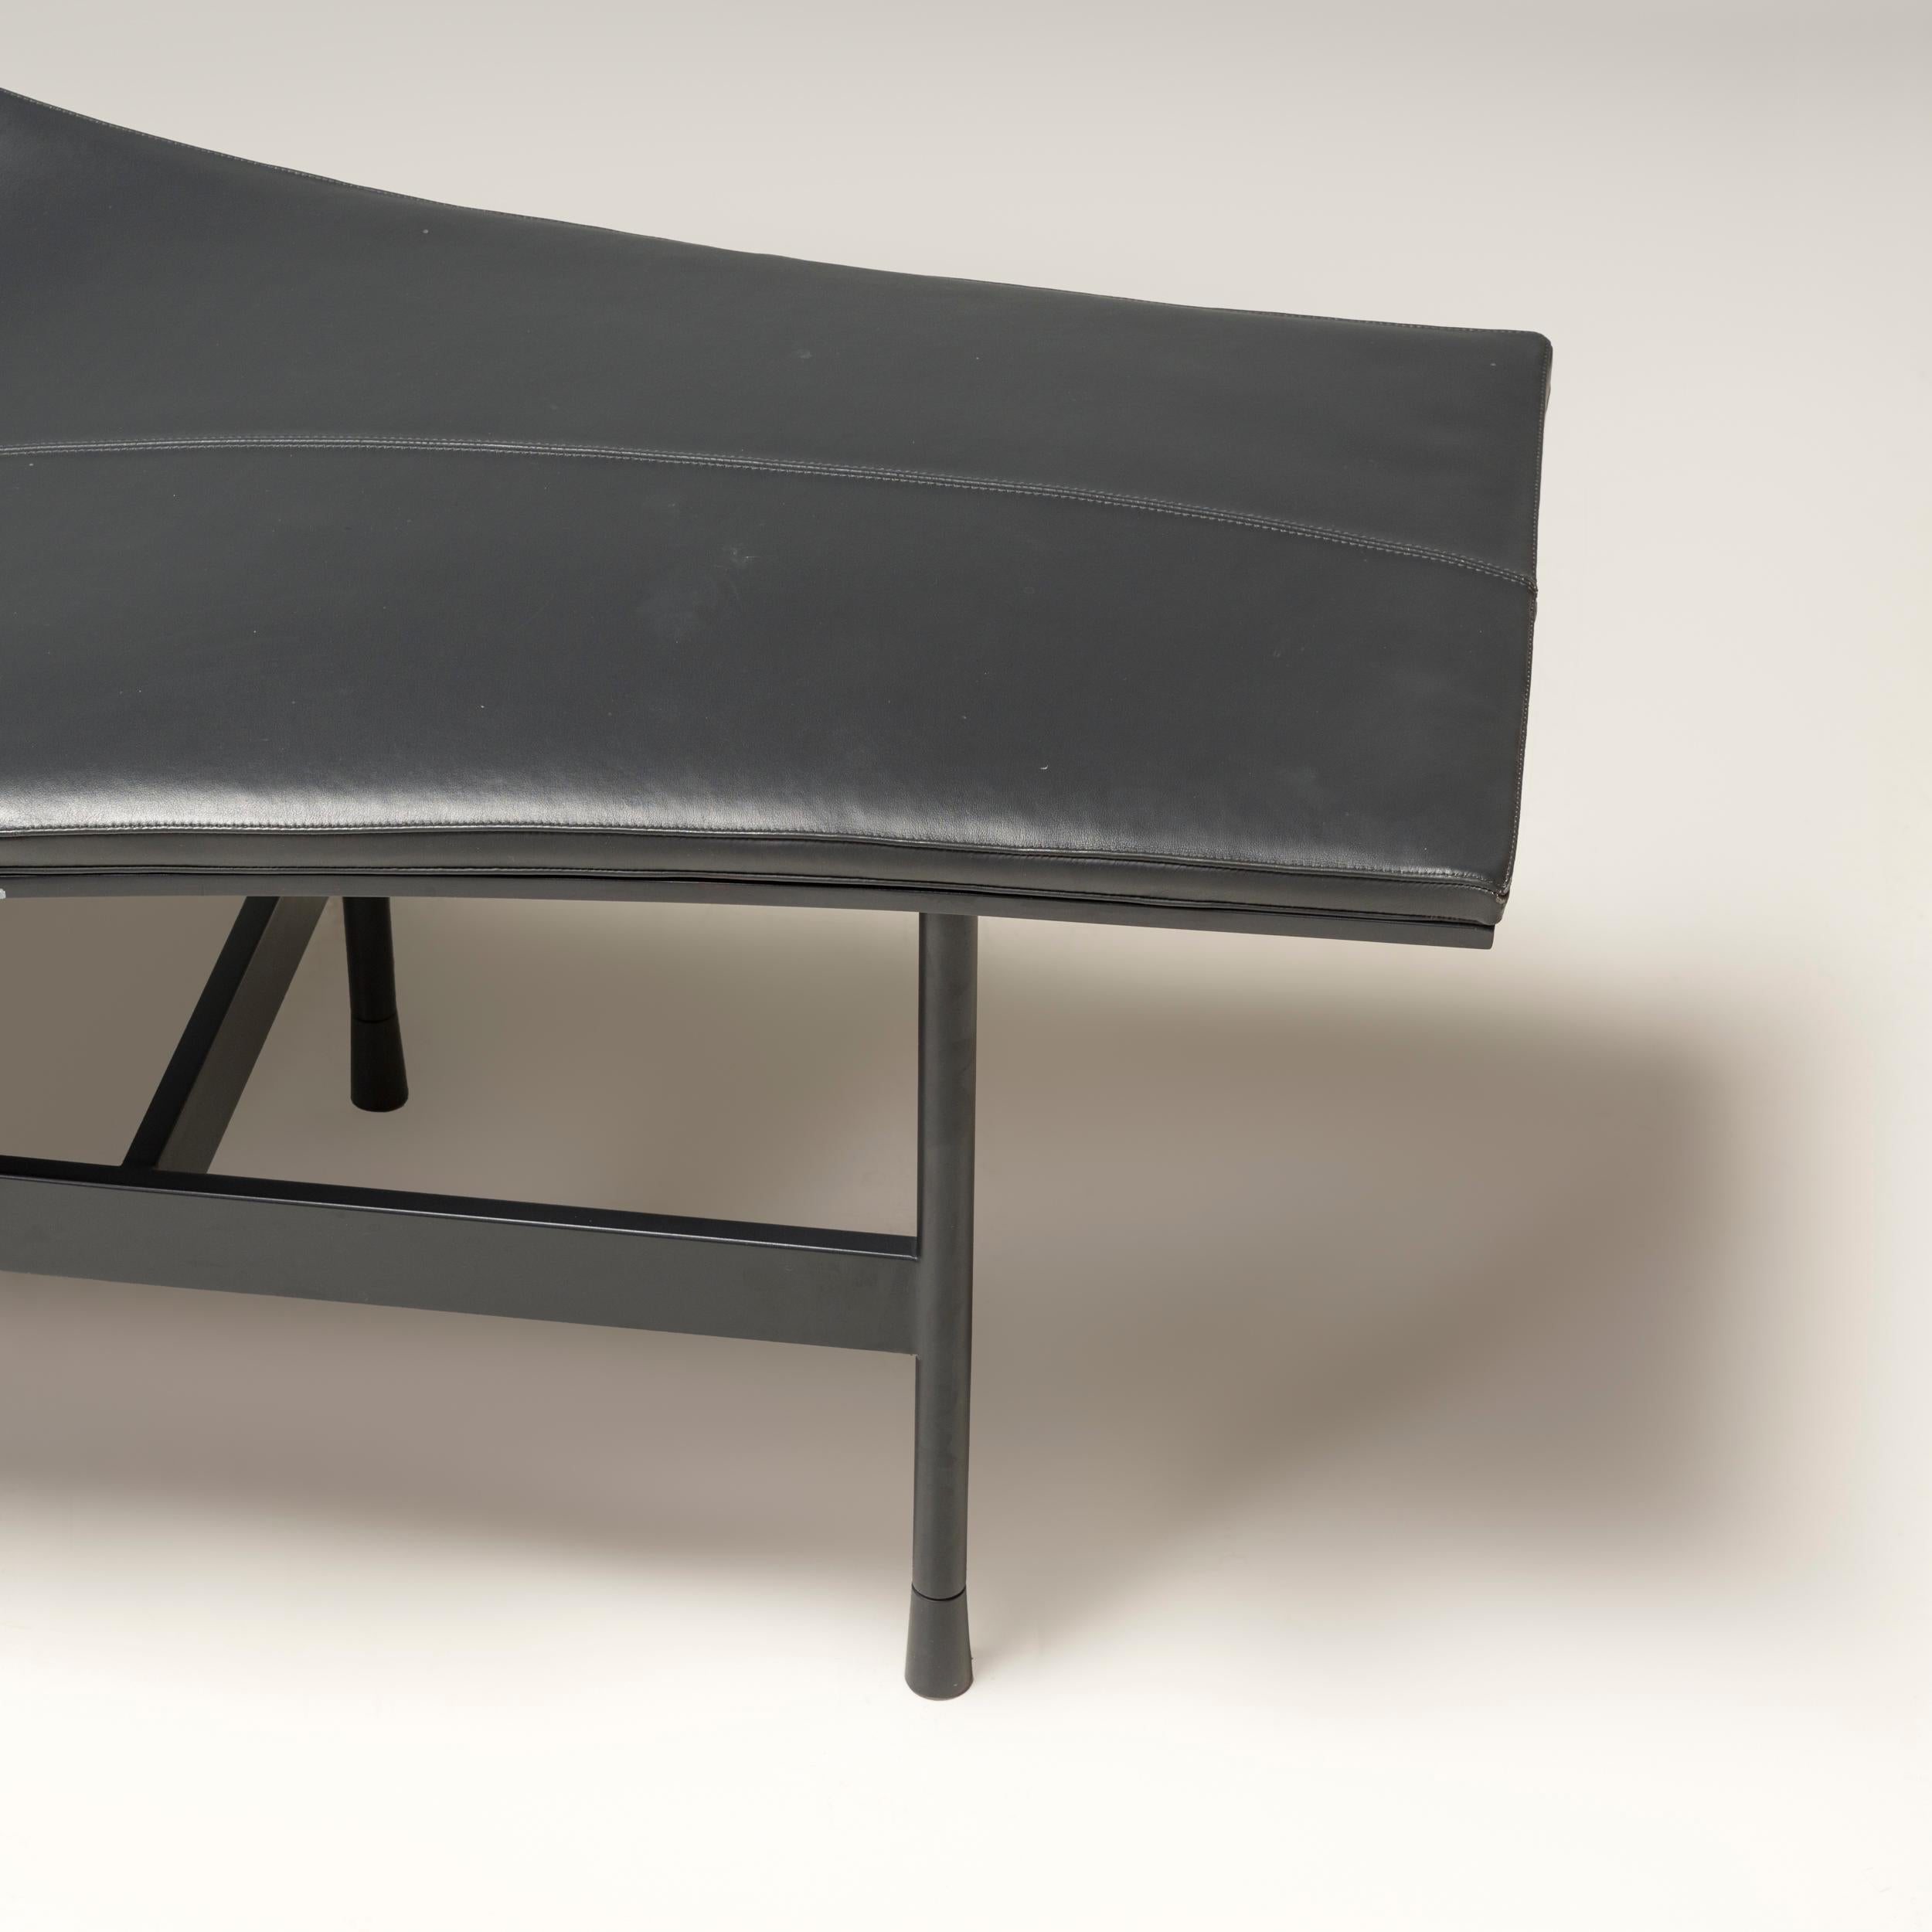 Contemporary B&B Italia by Jean-Marie Massaud Black Leather Terminal 1 Chaise Longue Armchair For Sale